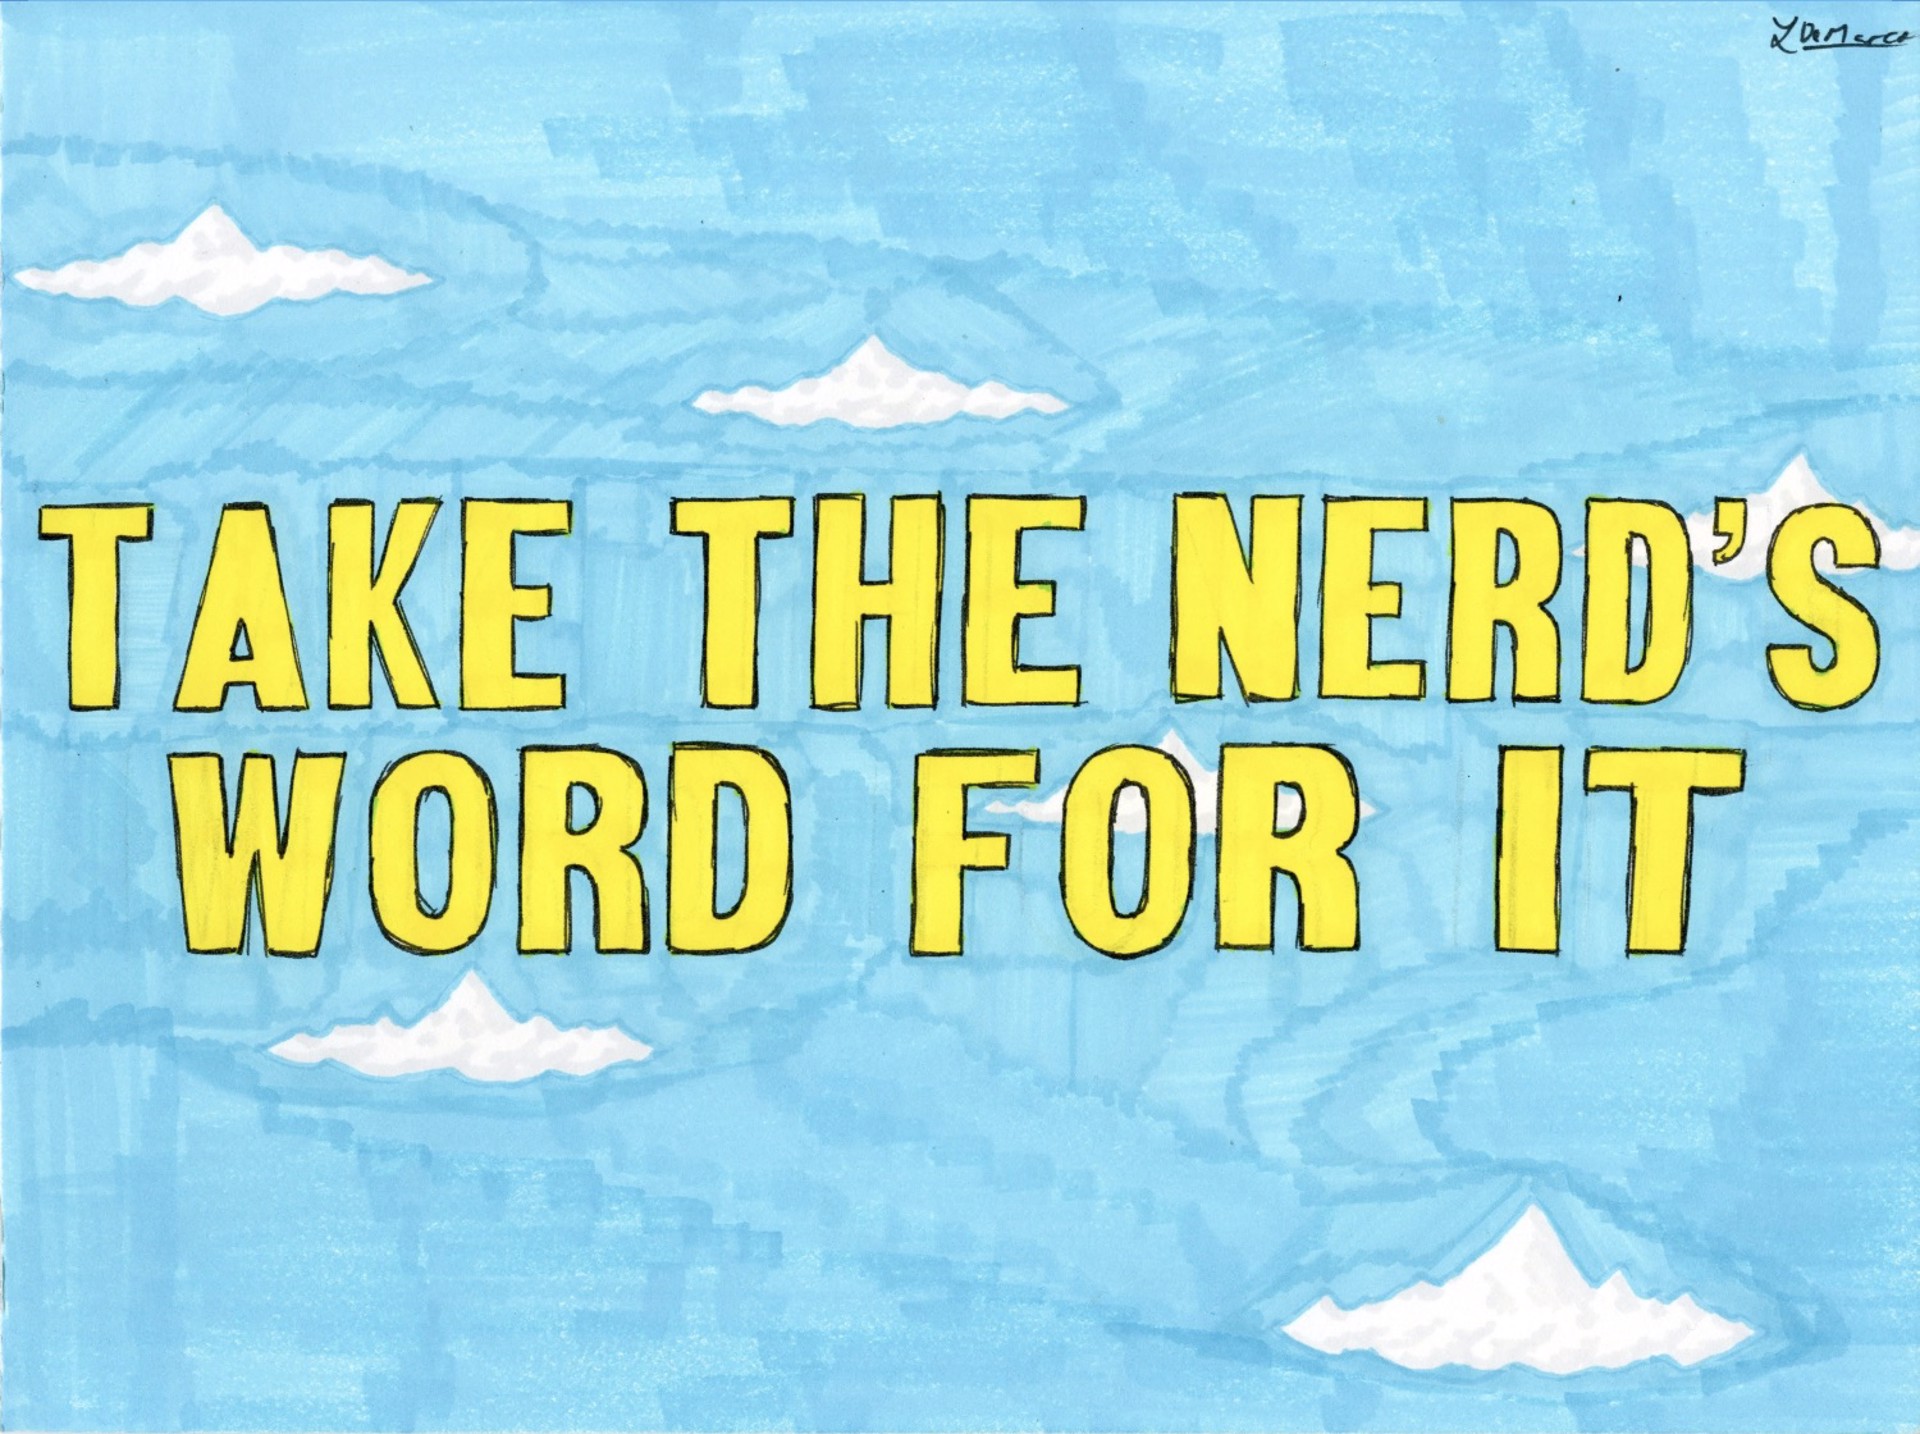 Louis DeMarco (Project Onward) - Take the Nerd’s Word for It by Visiting Artist